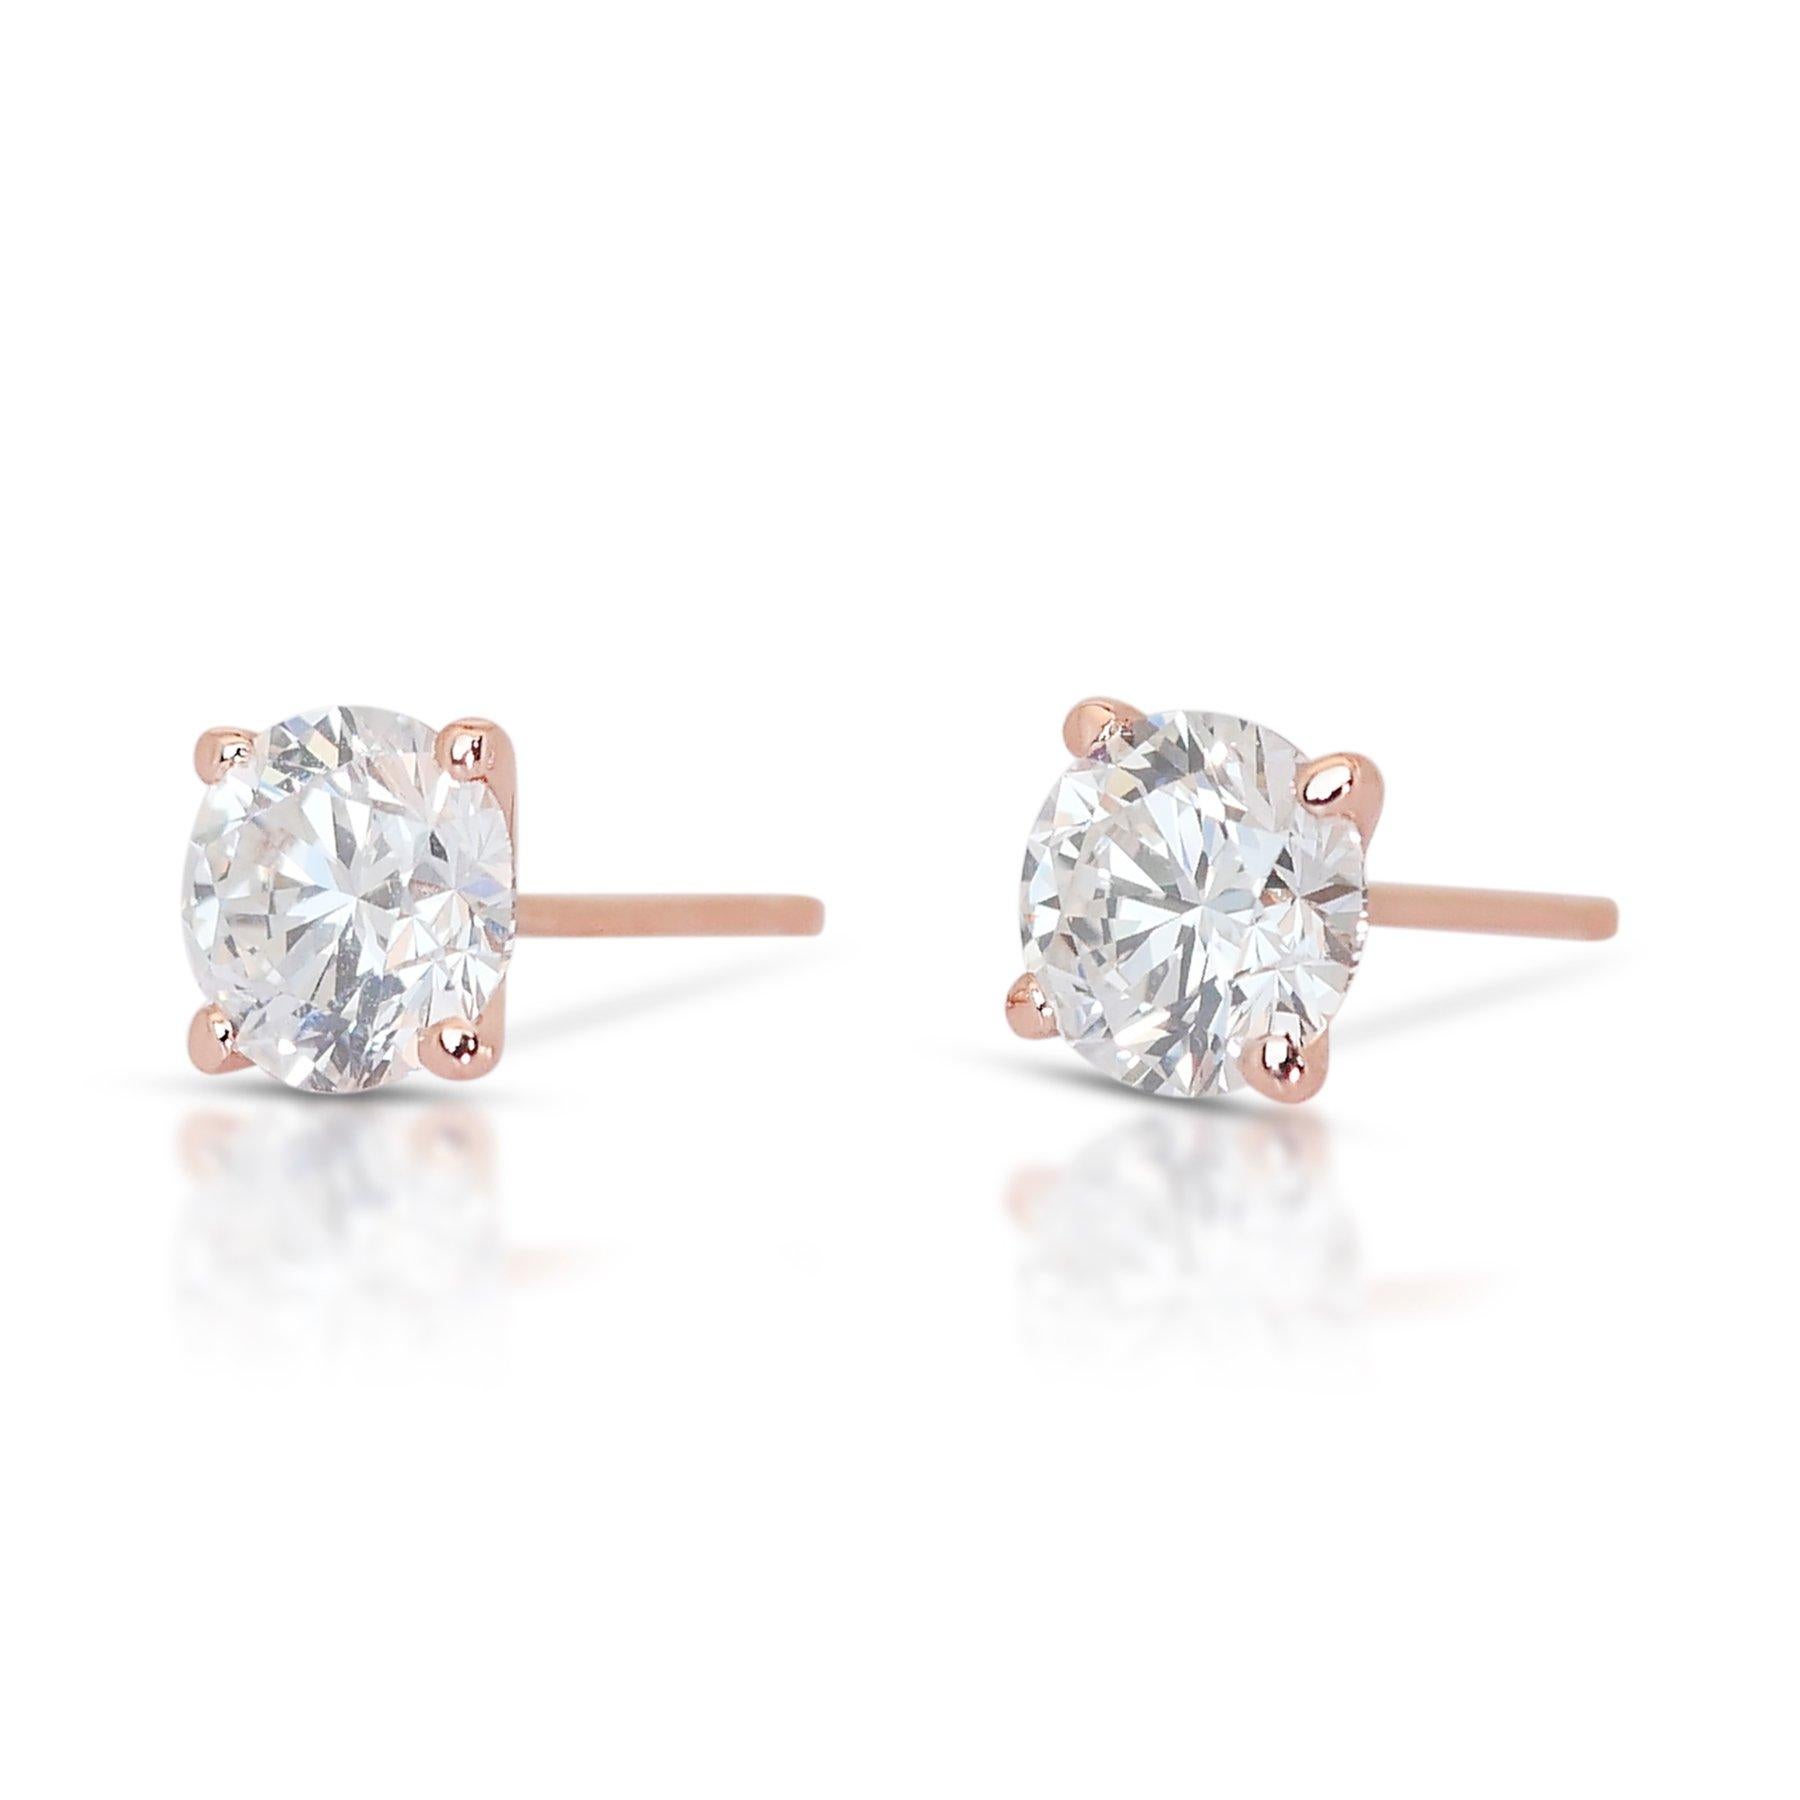 Round Cut Magical 18K Rose Gold Diamond Stud Earrings with 1.80ct - GIA Certified For Sale